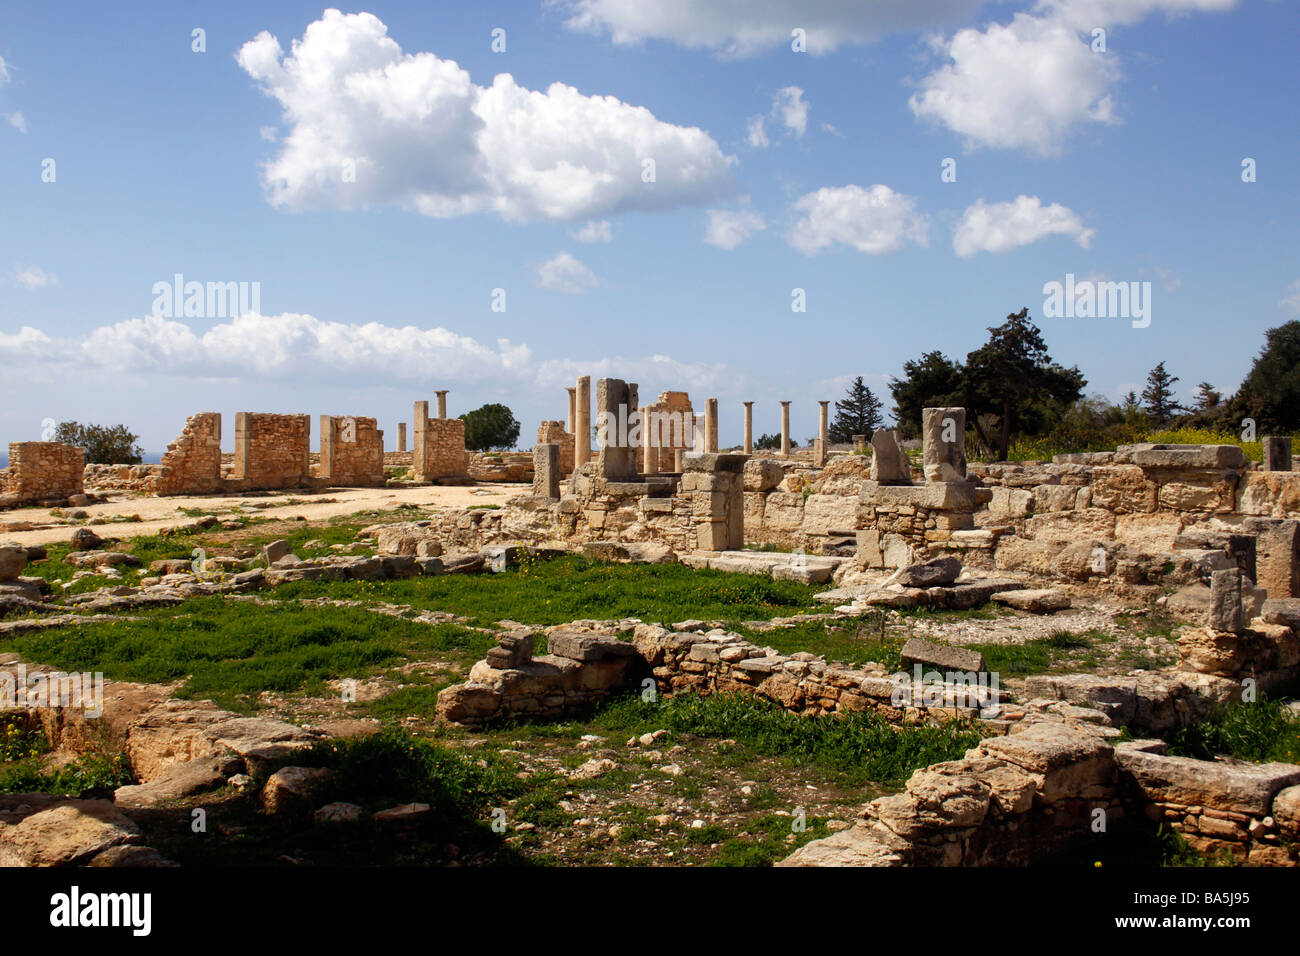 THE ARCHAIC PRECINCT OF THE SANCTUARY OF APOLLO AT KOURION ON THE ISLAND OF CYPRUS. Stock Photo